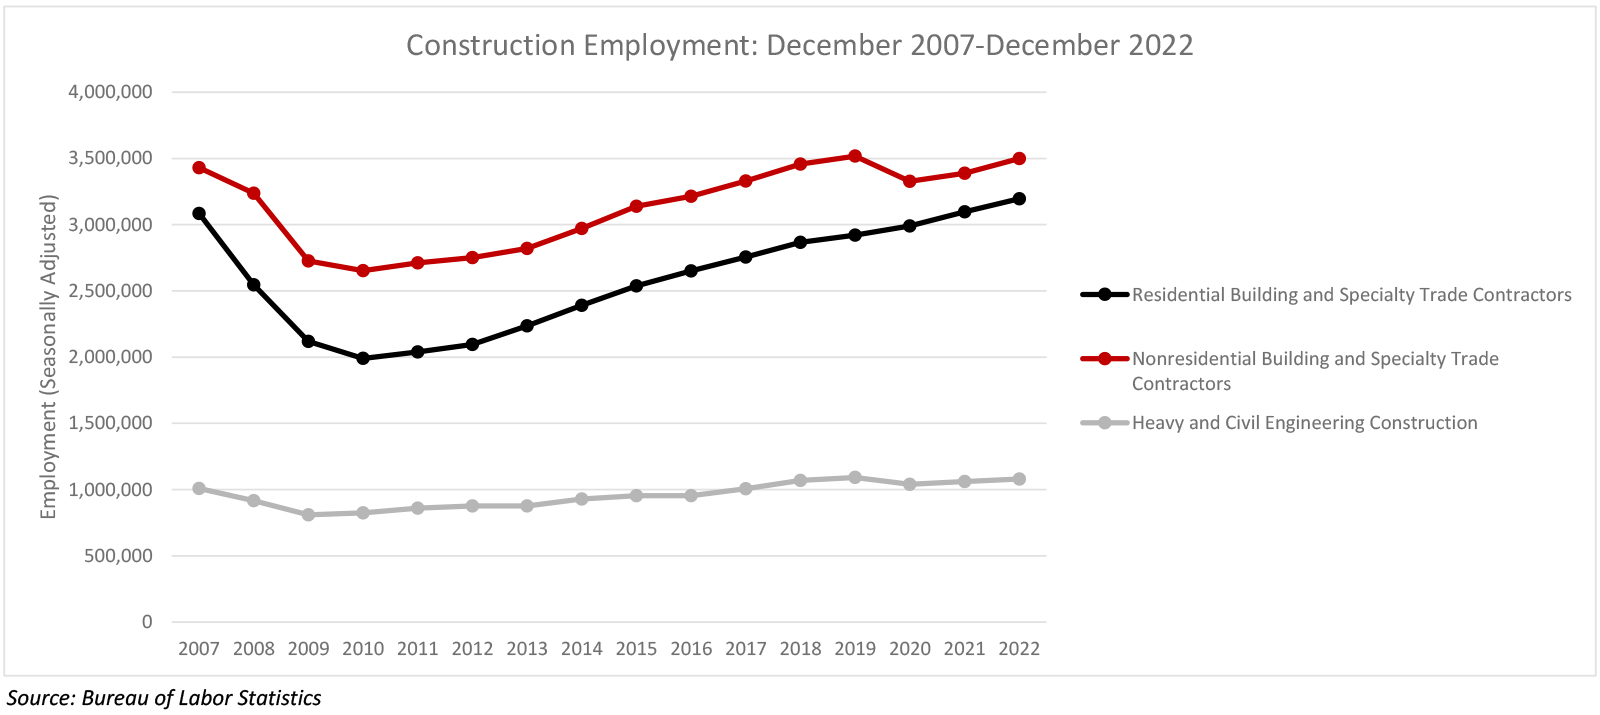 December Construction Employment Up by 28,000